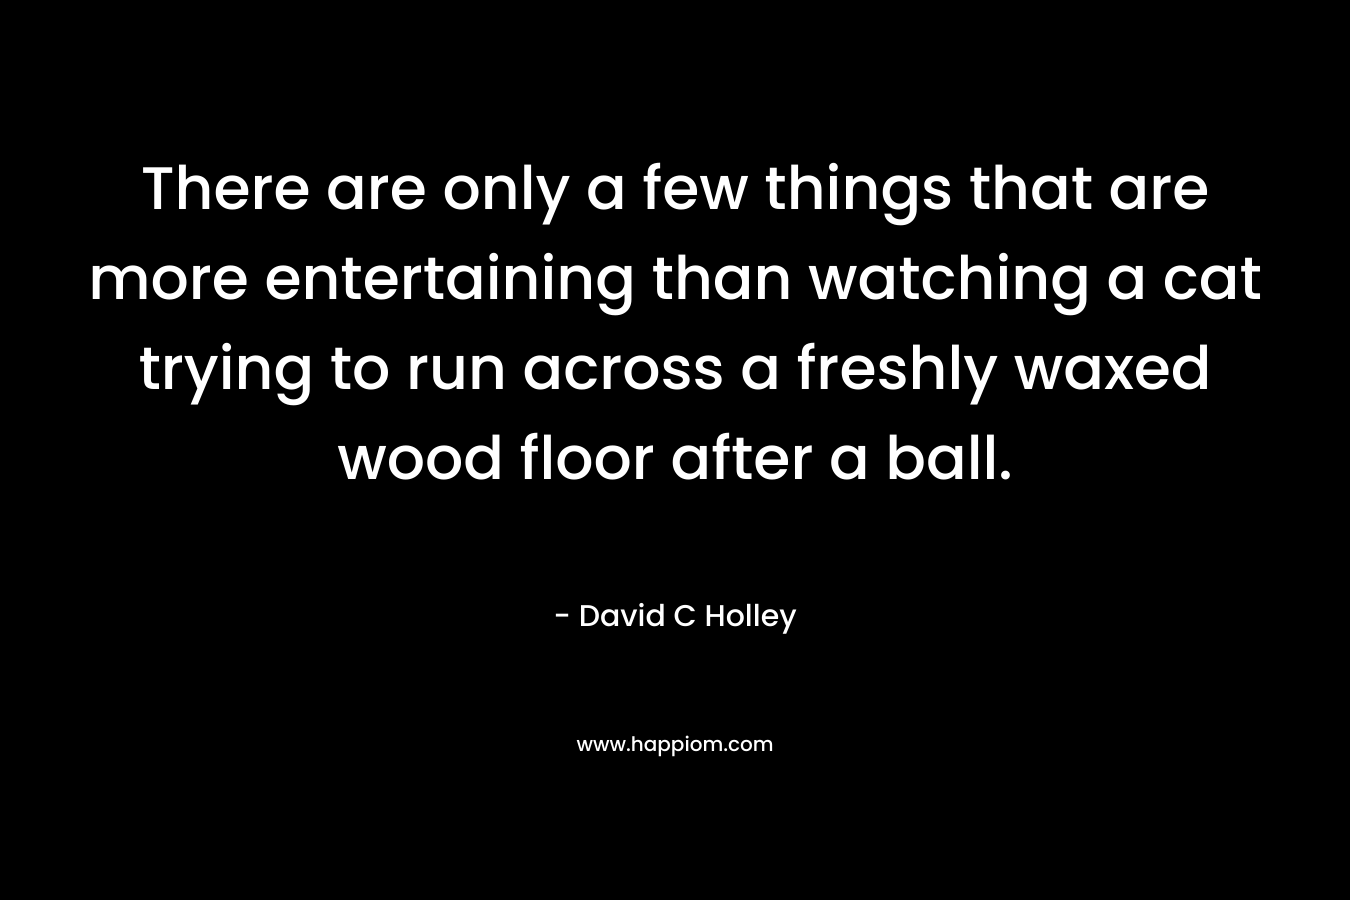 There are only a few things that are more entertaining than watching a cat trying to run across a freshly waxed wood floor after a ball. – David C Holley